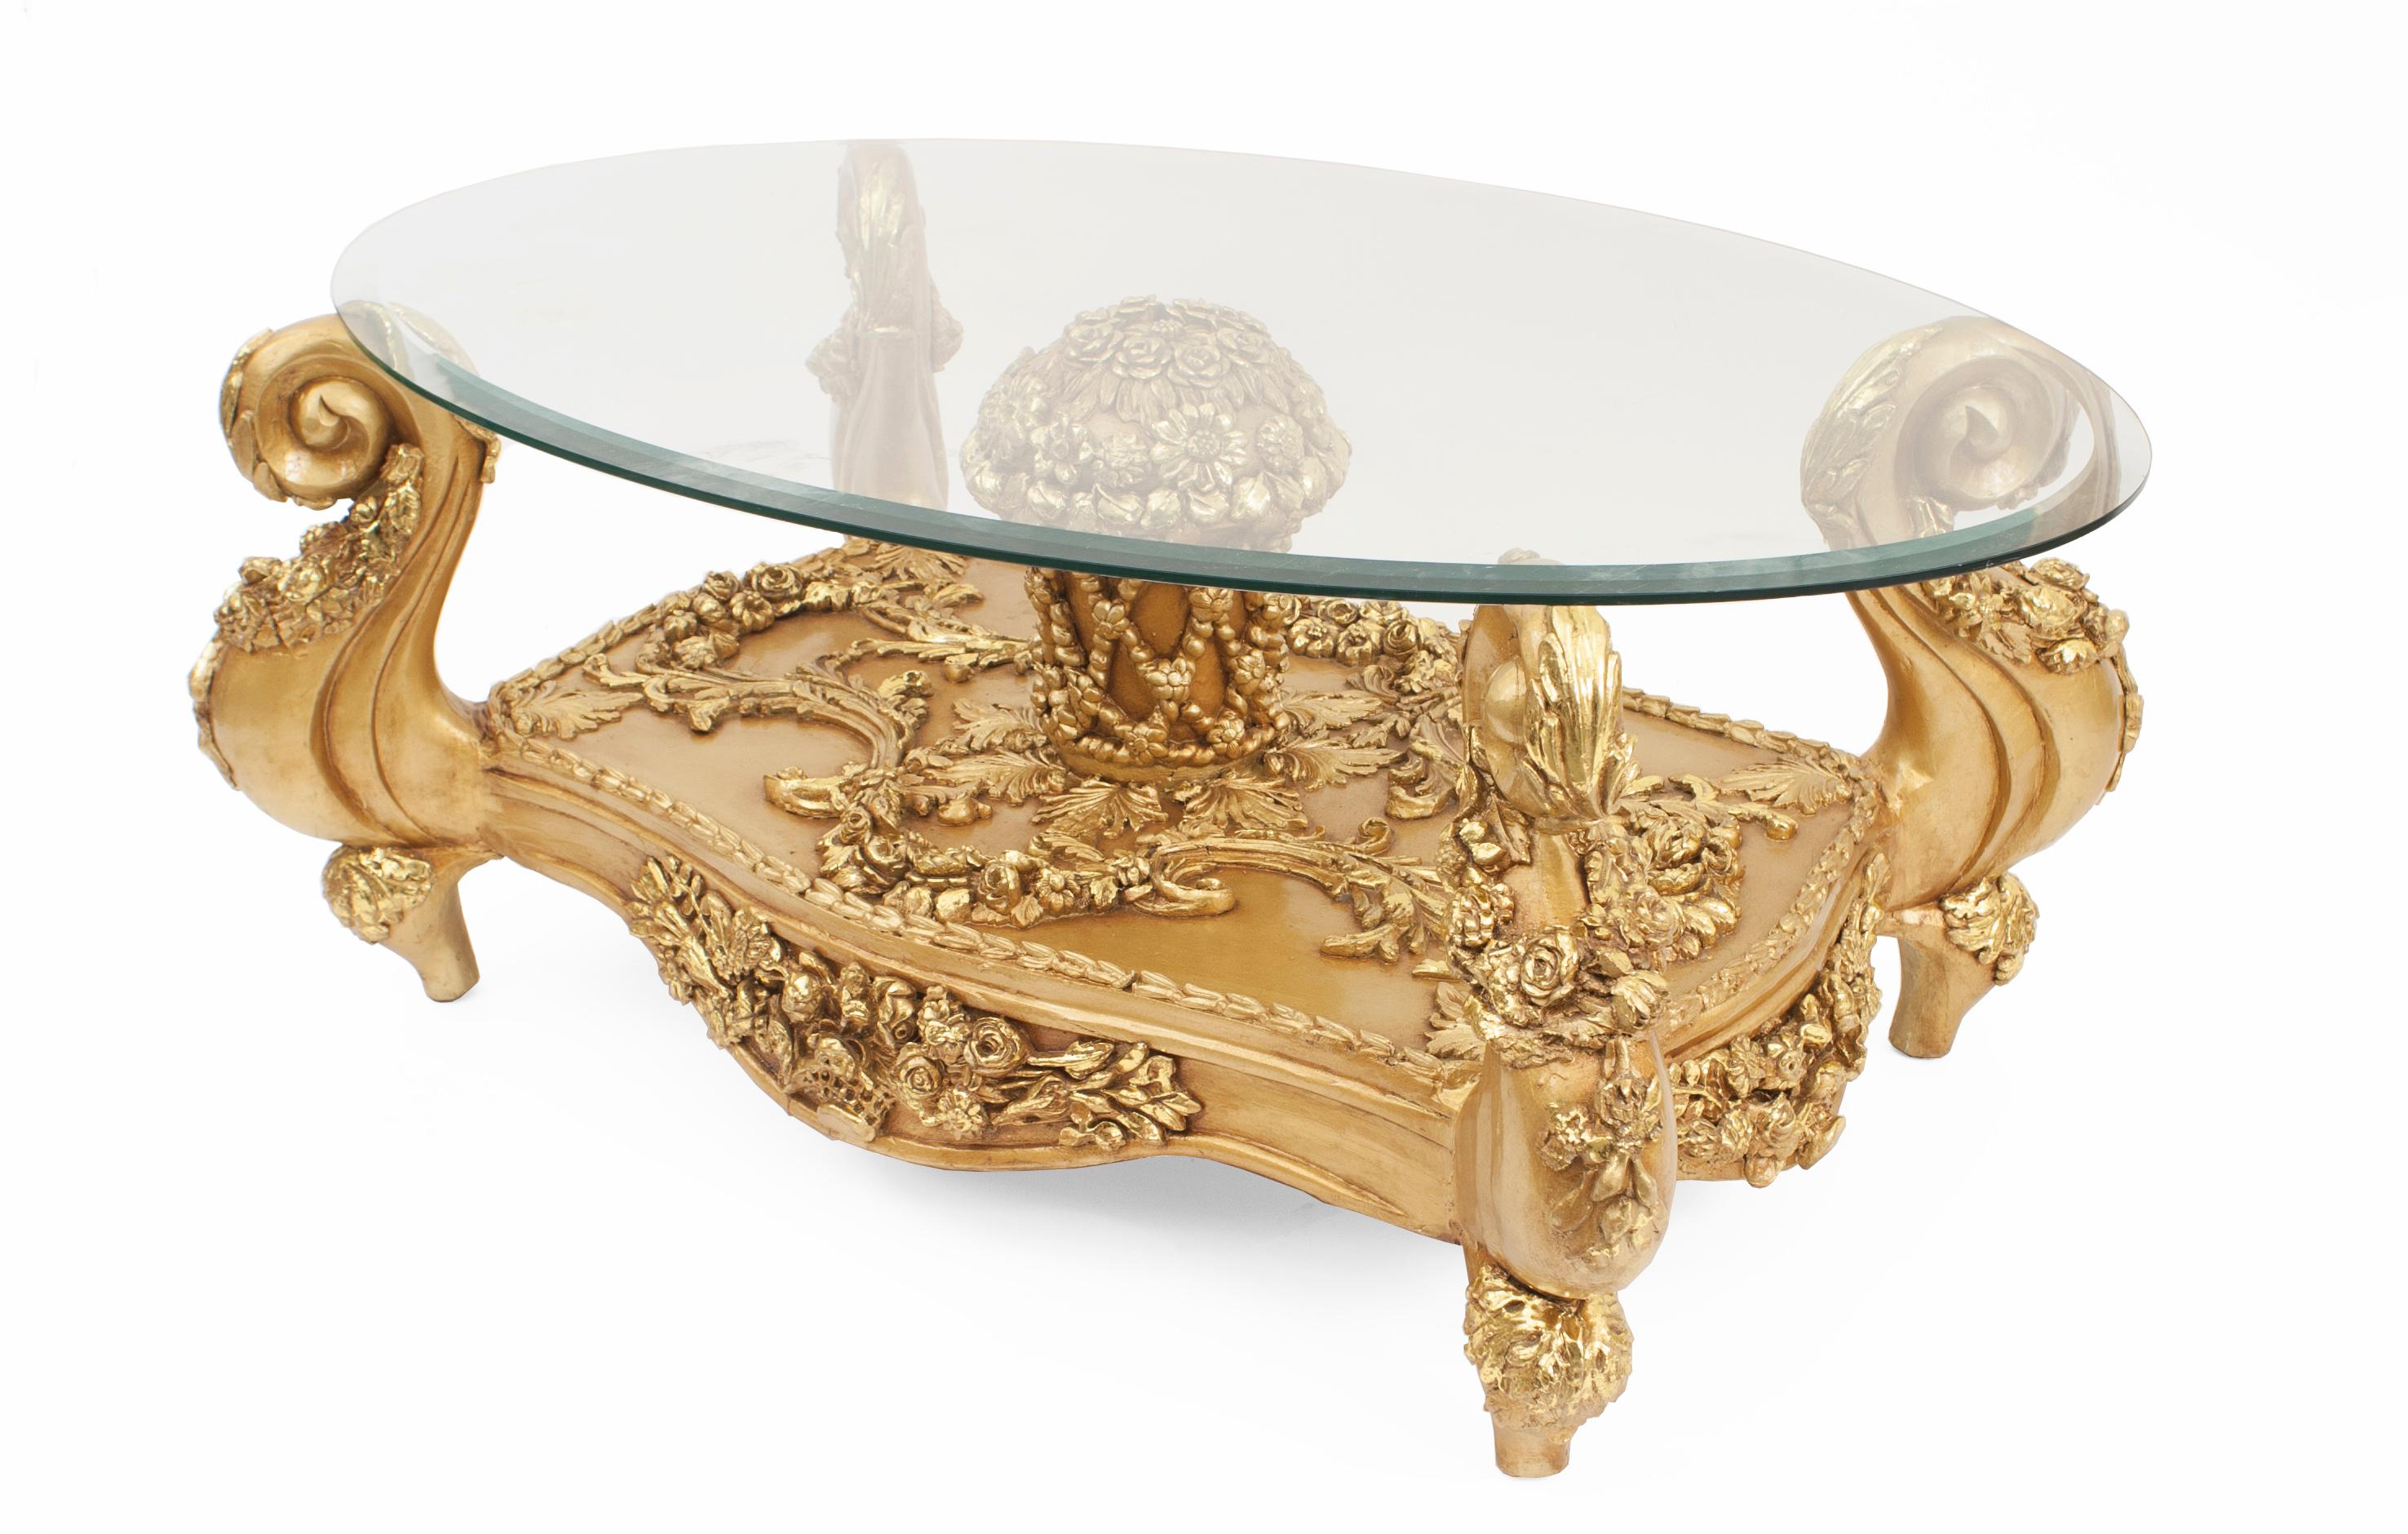 Italian Baroque style 20th century coffee table with giltwood filigree base and removable oval glass top.
 